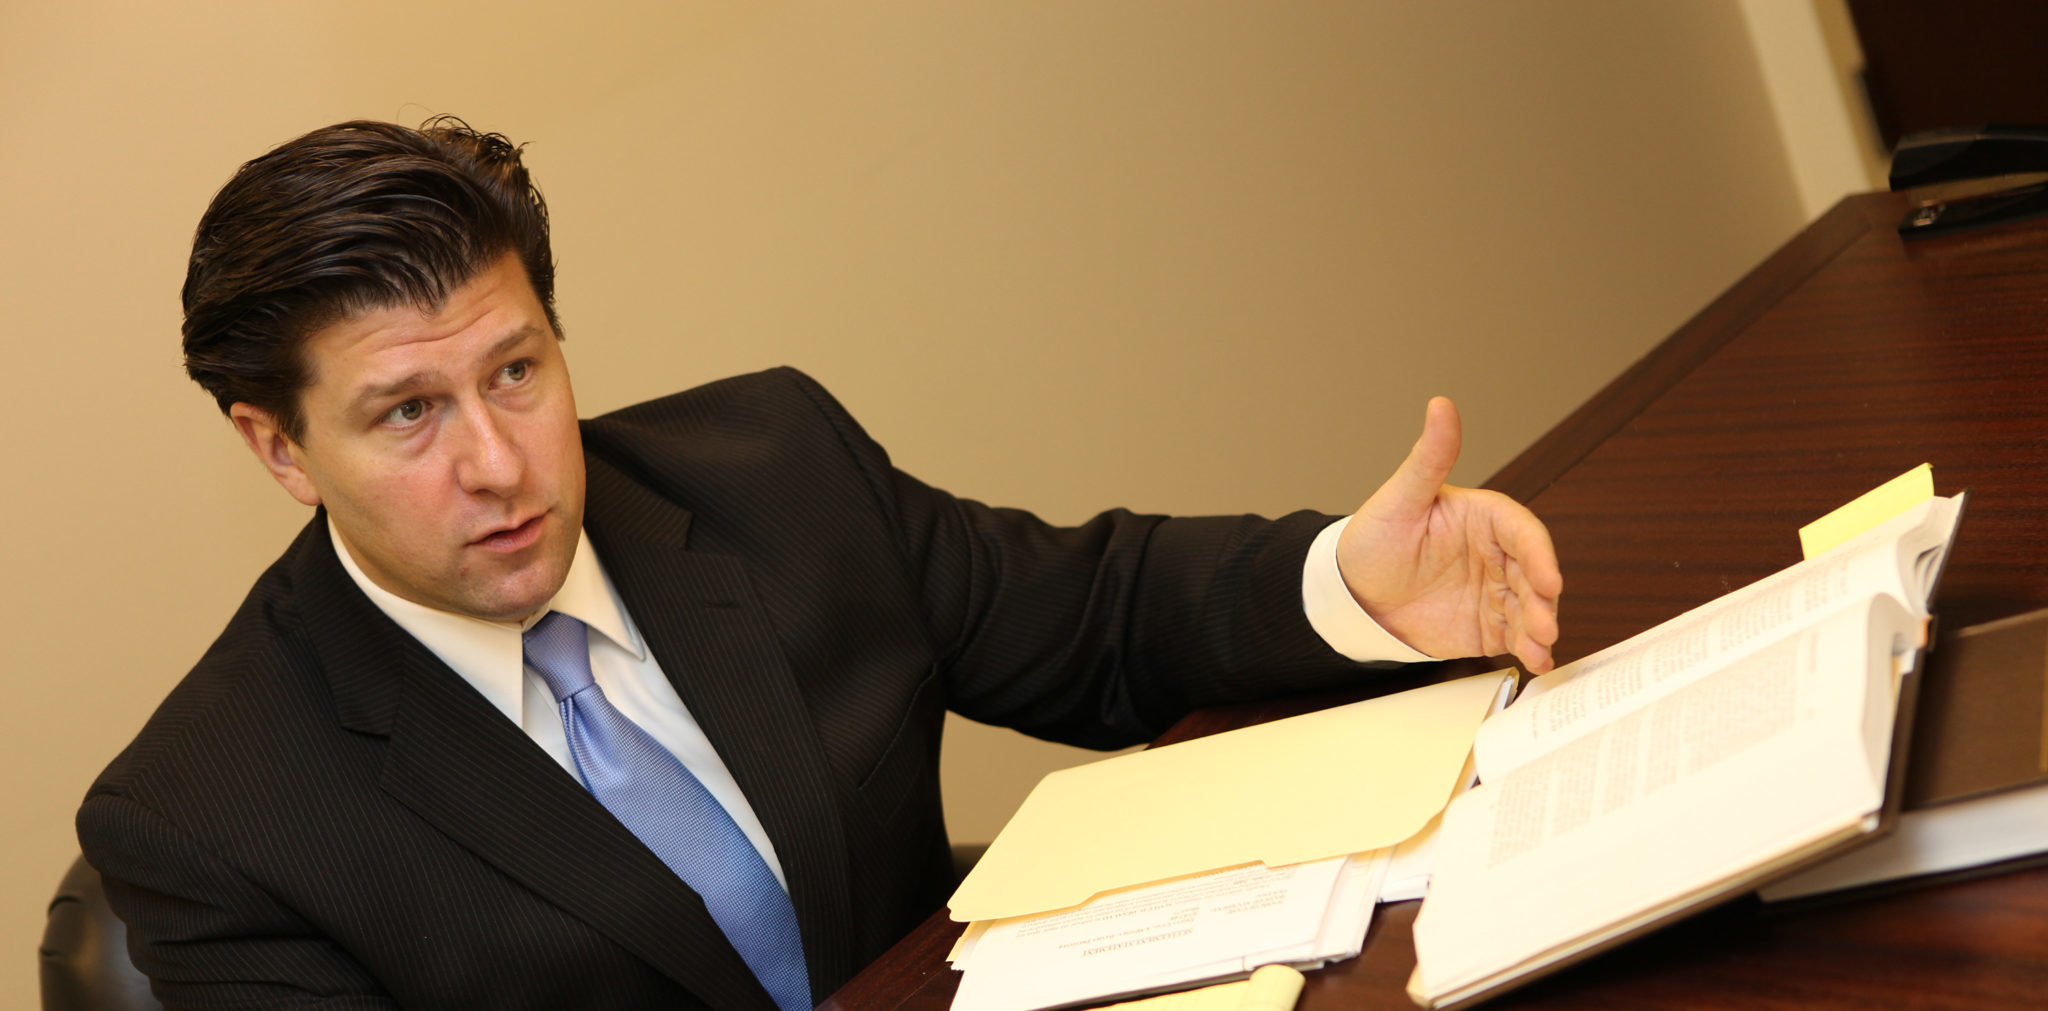 chicago personal injury lawyer